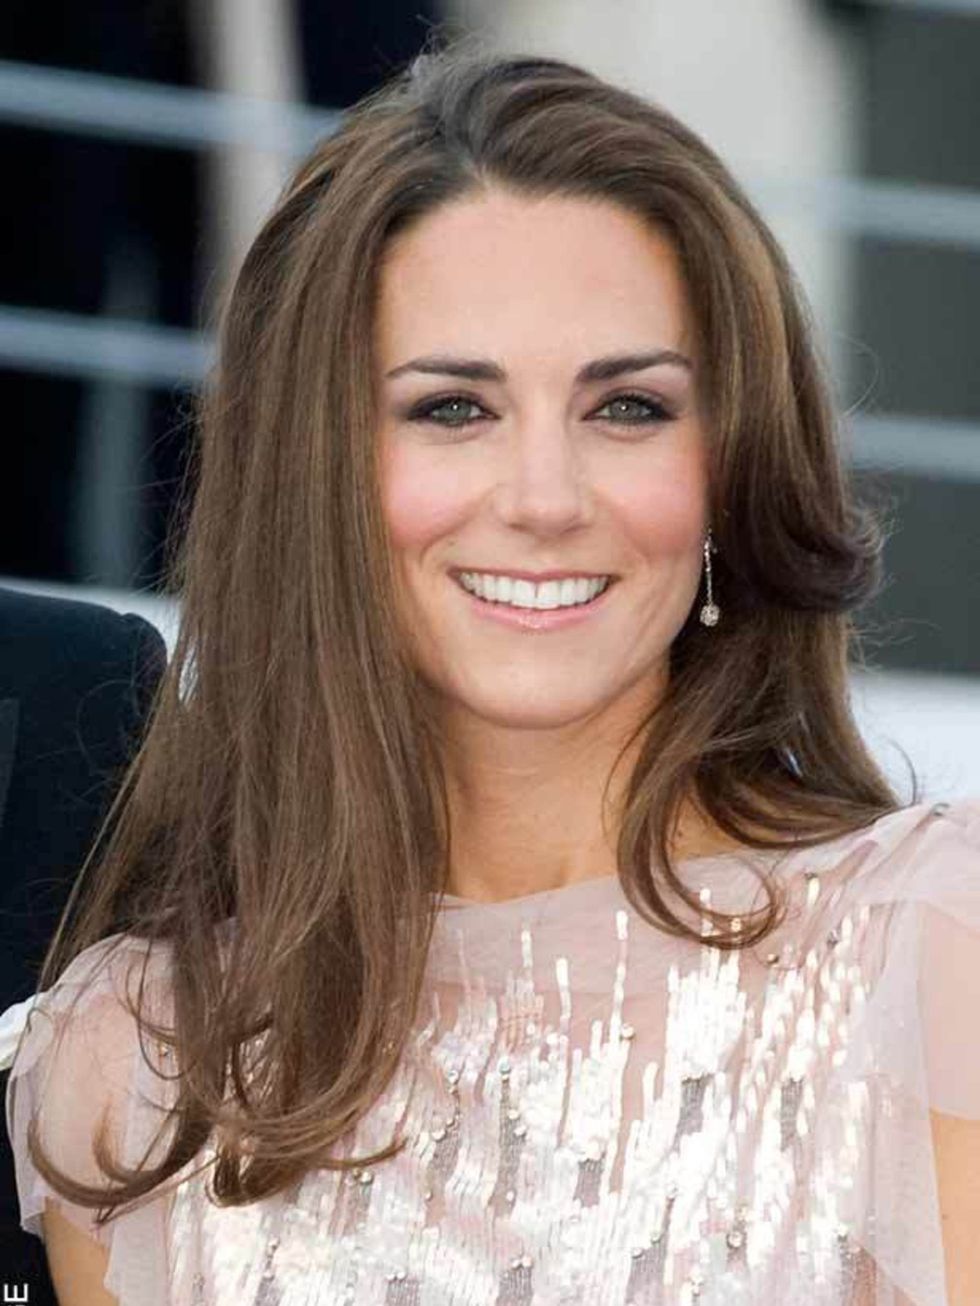 <p><a href="http://www.elleuk.com/starstyle/style-files/(section)/kate-middleton">See Kate's best fashion looks...</a></p>